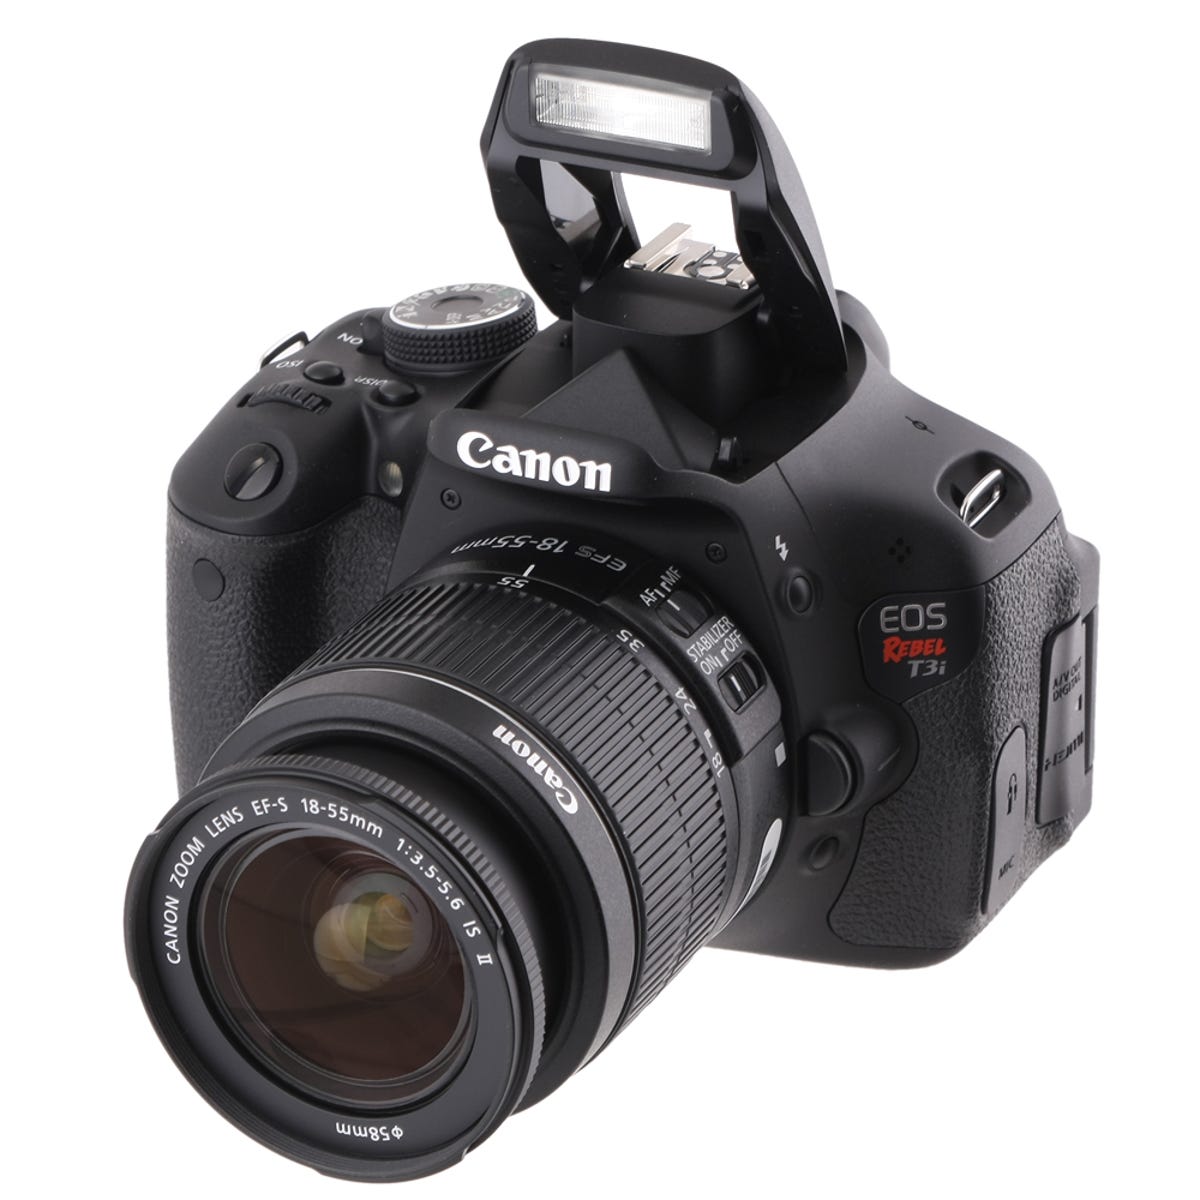 Canon Rebel T3i review: Canon EOS Rebel T3i - CNET